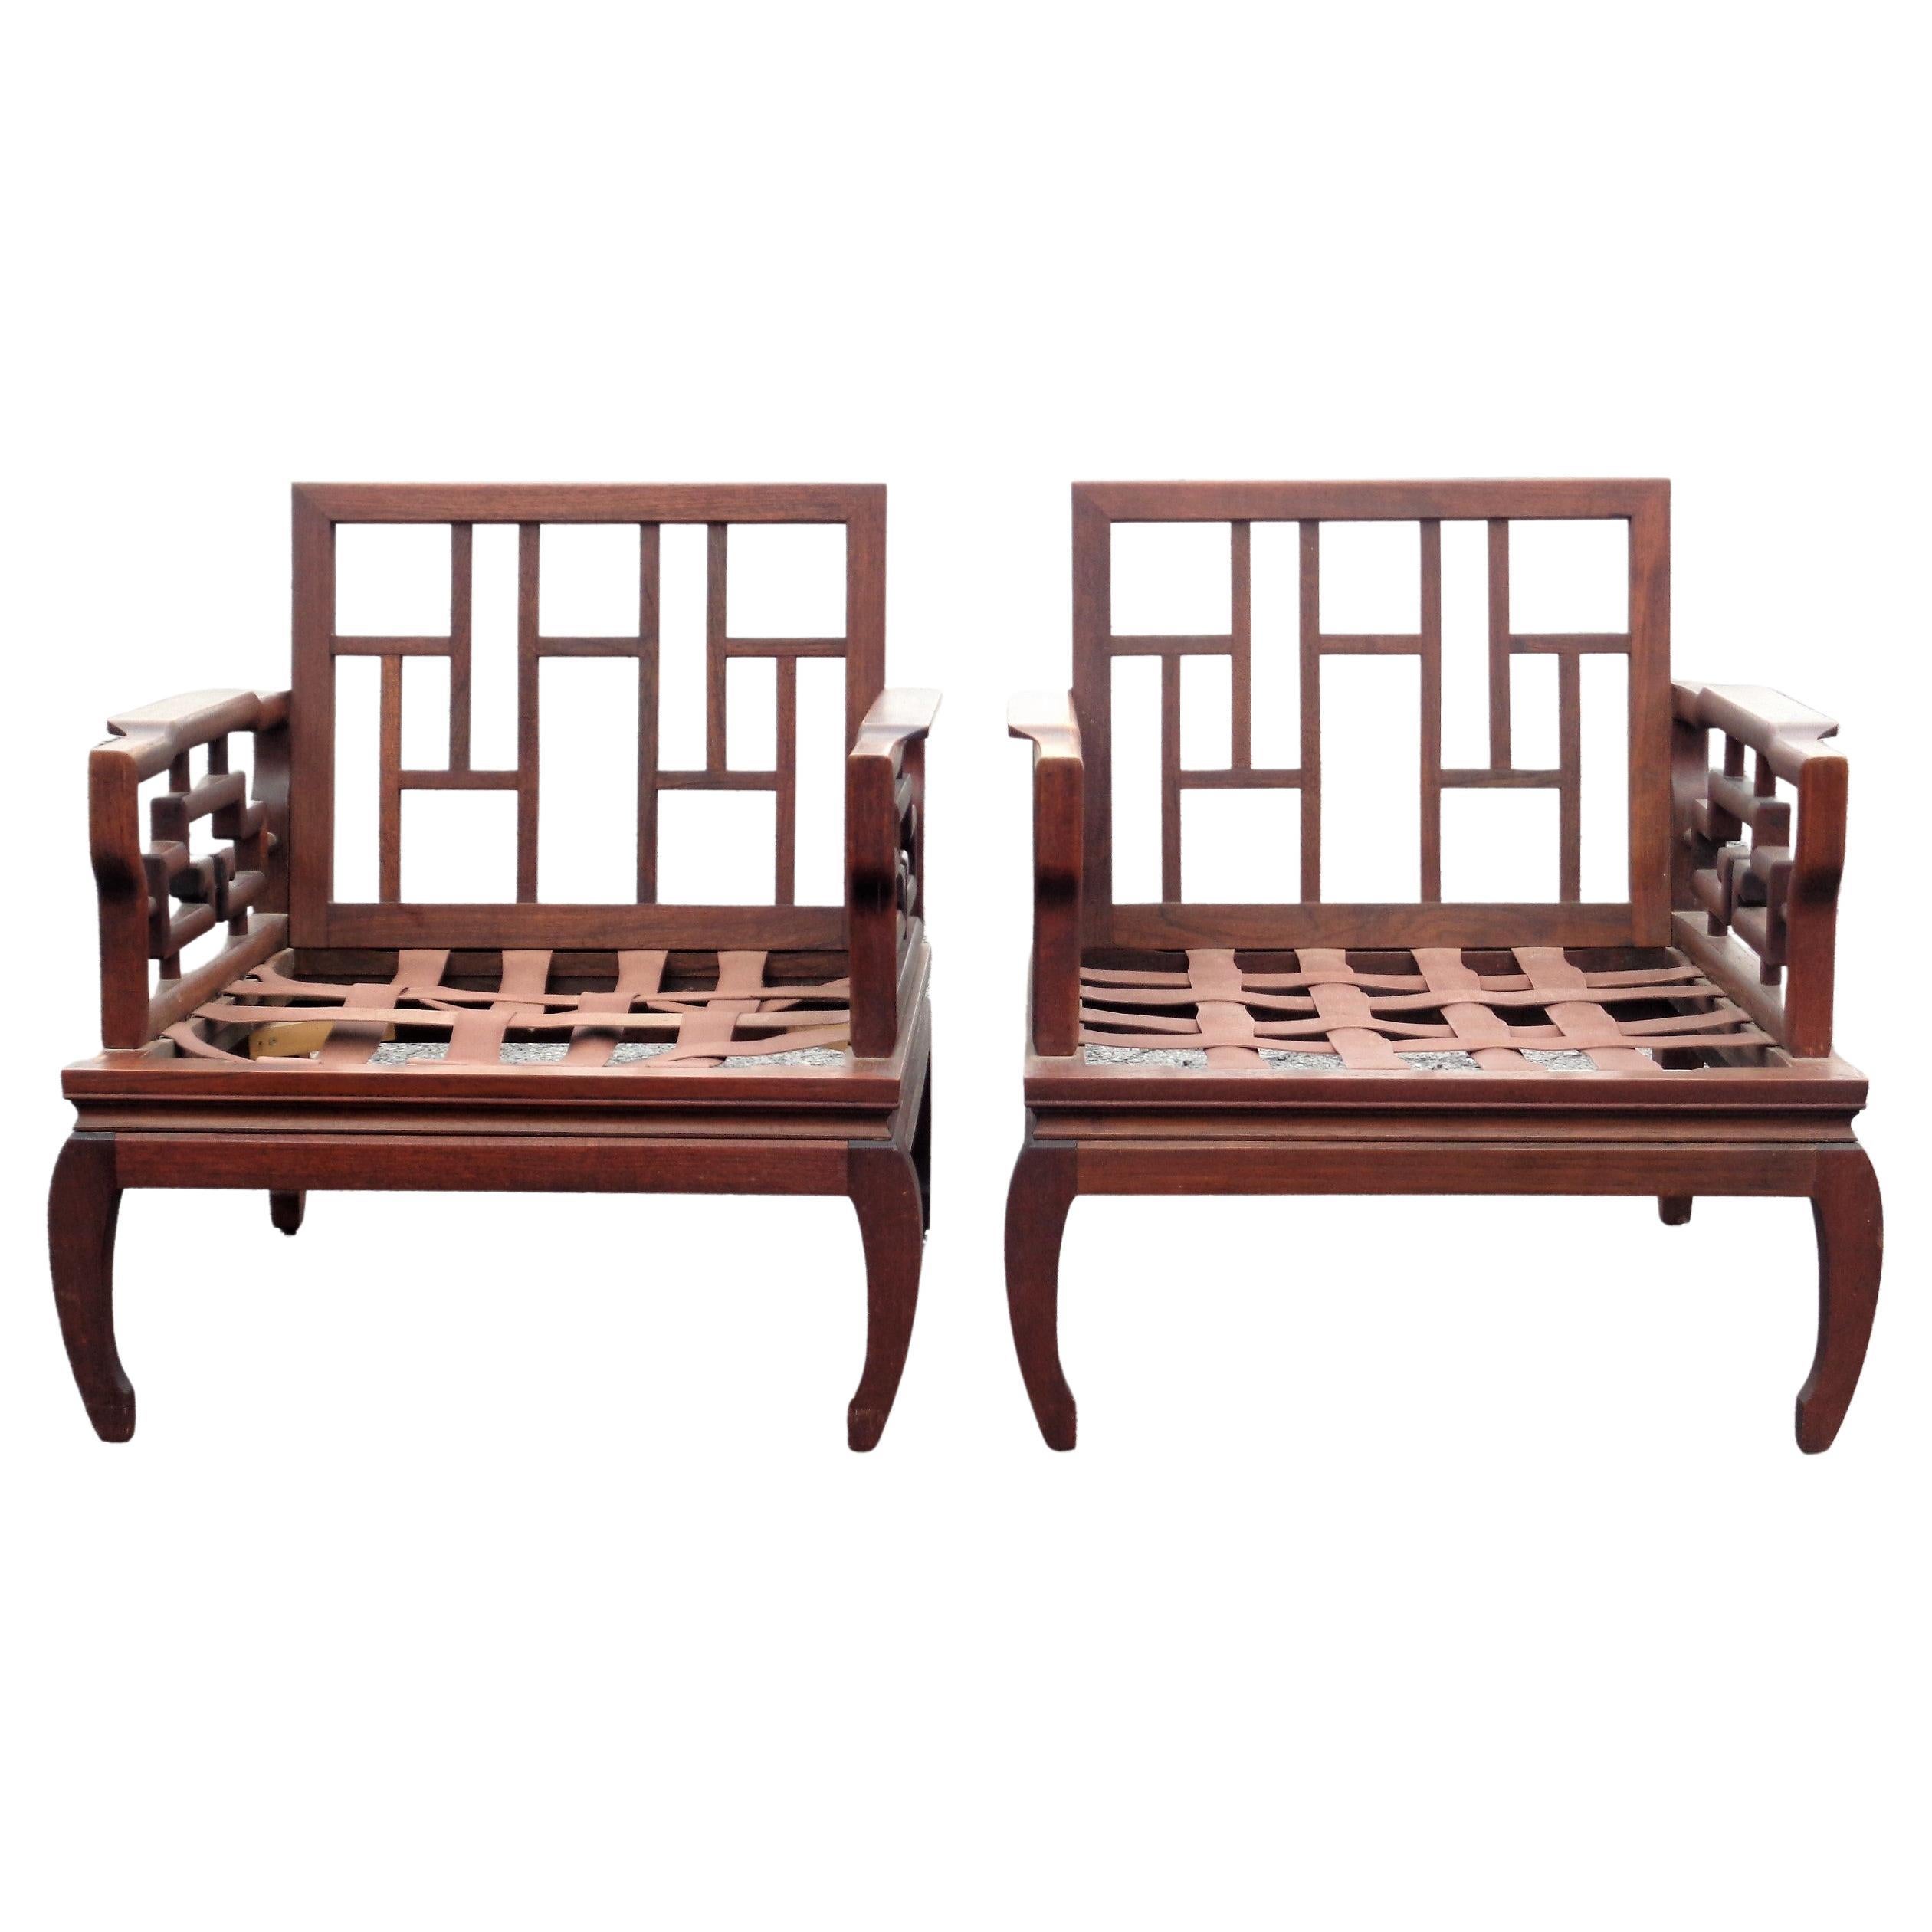 A very elegant pair of Asian Ming style hand carved mahogany hardwood lounge chairs in nicely aged original surface color w/ beautifully figured grain. Exceptional quality finely detailed hand crafted woodwork w/ pegged joinery construction. These